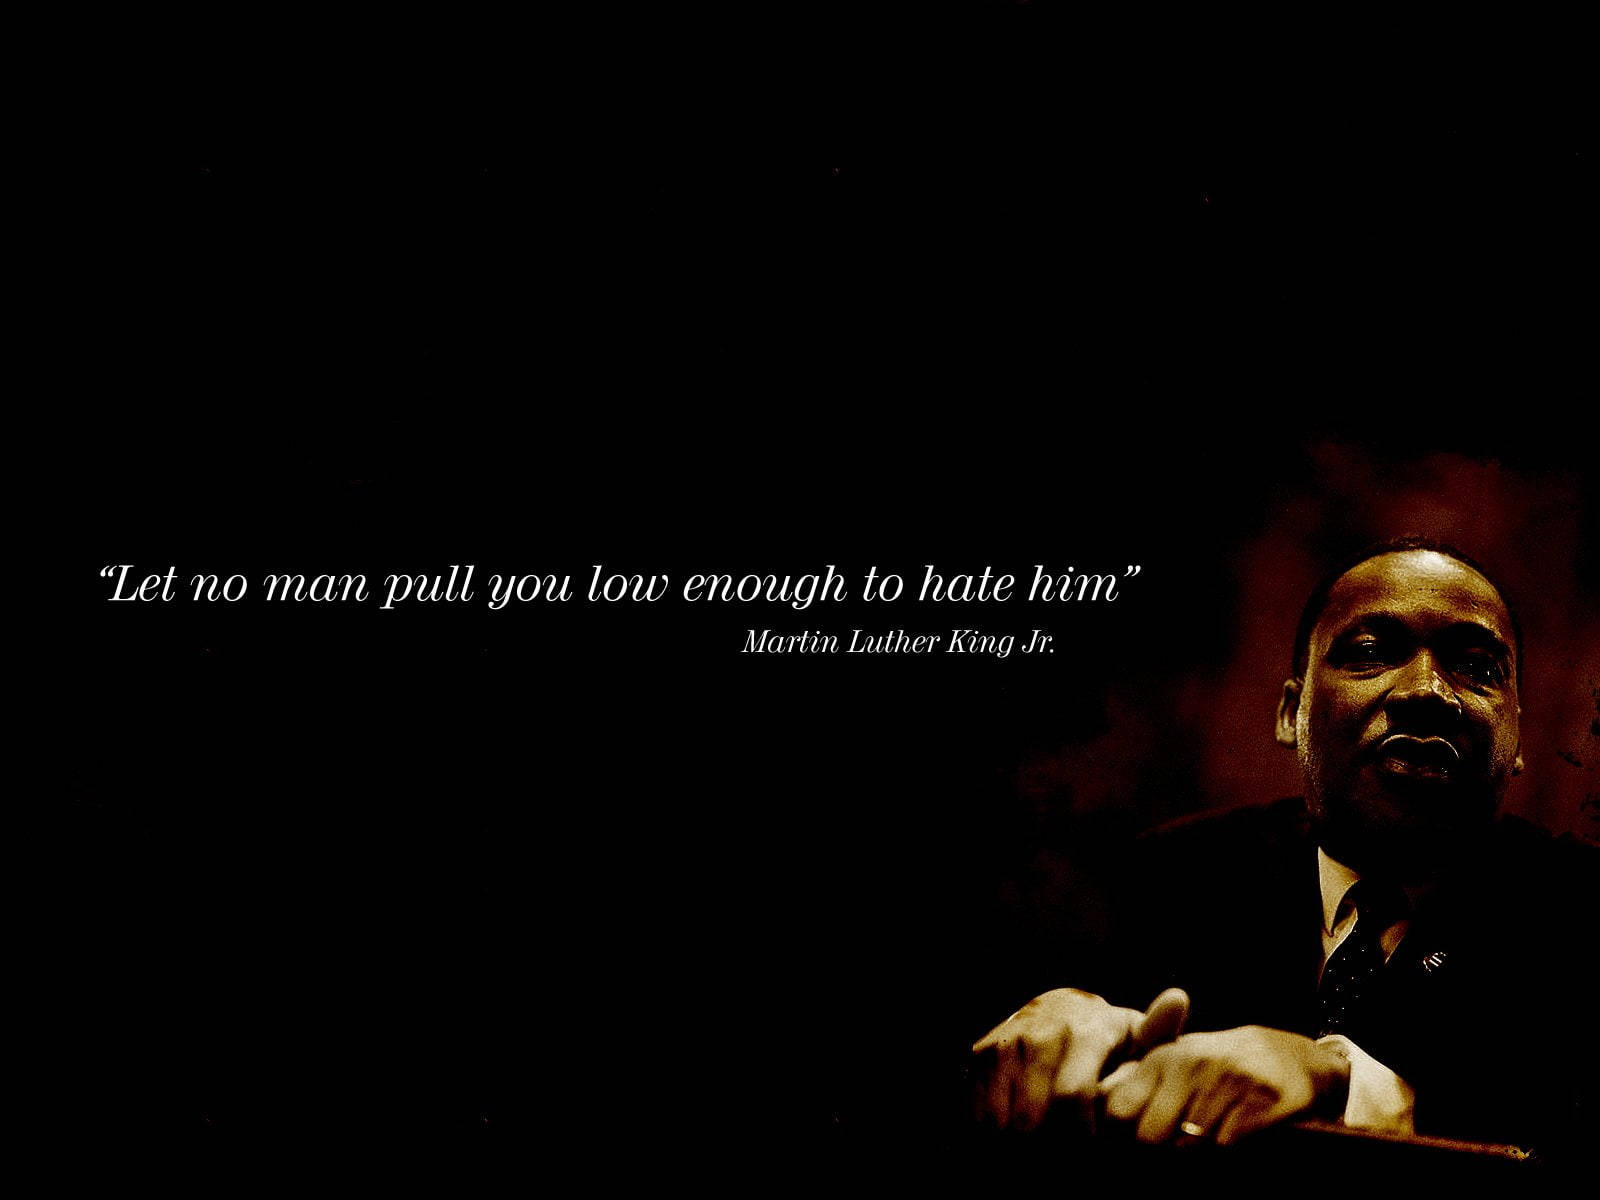 Caption: Martin Luther King Jr. Quoting Memorable Words of Wisdom Wallpaper